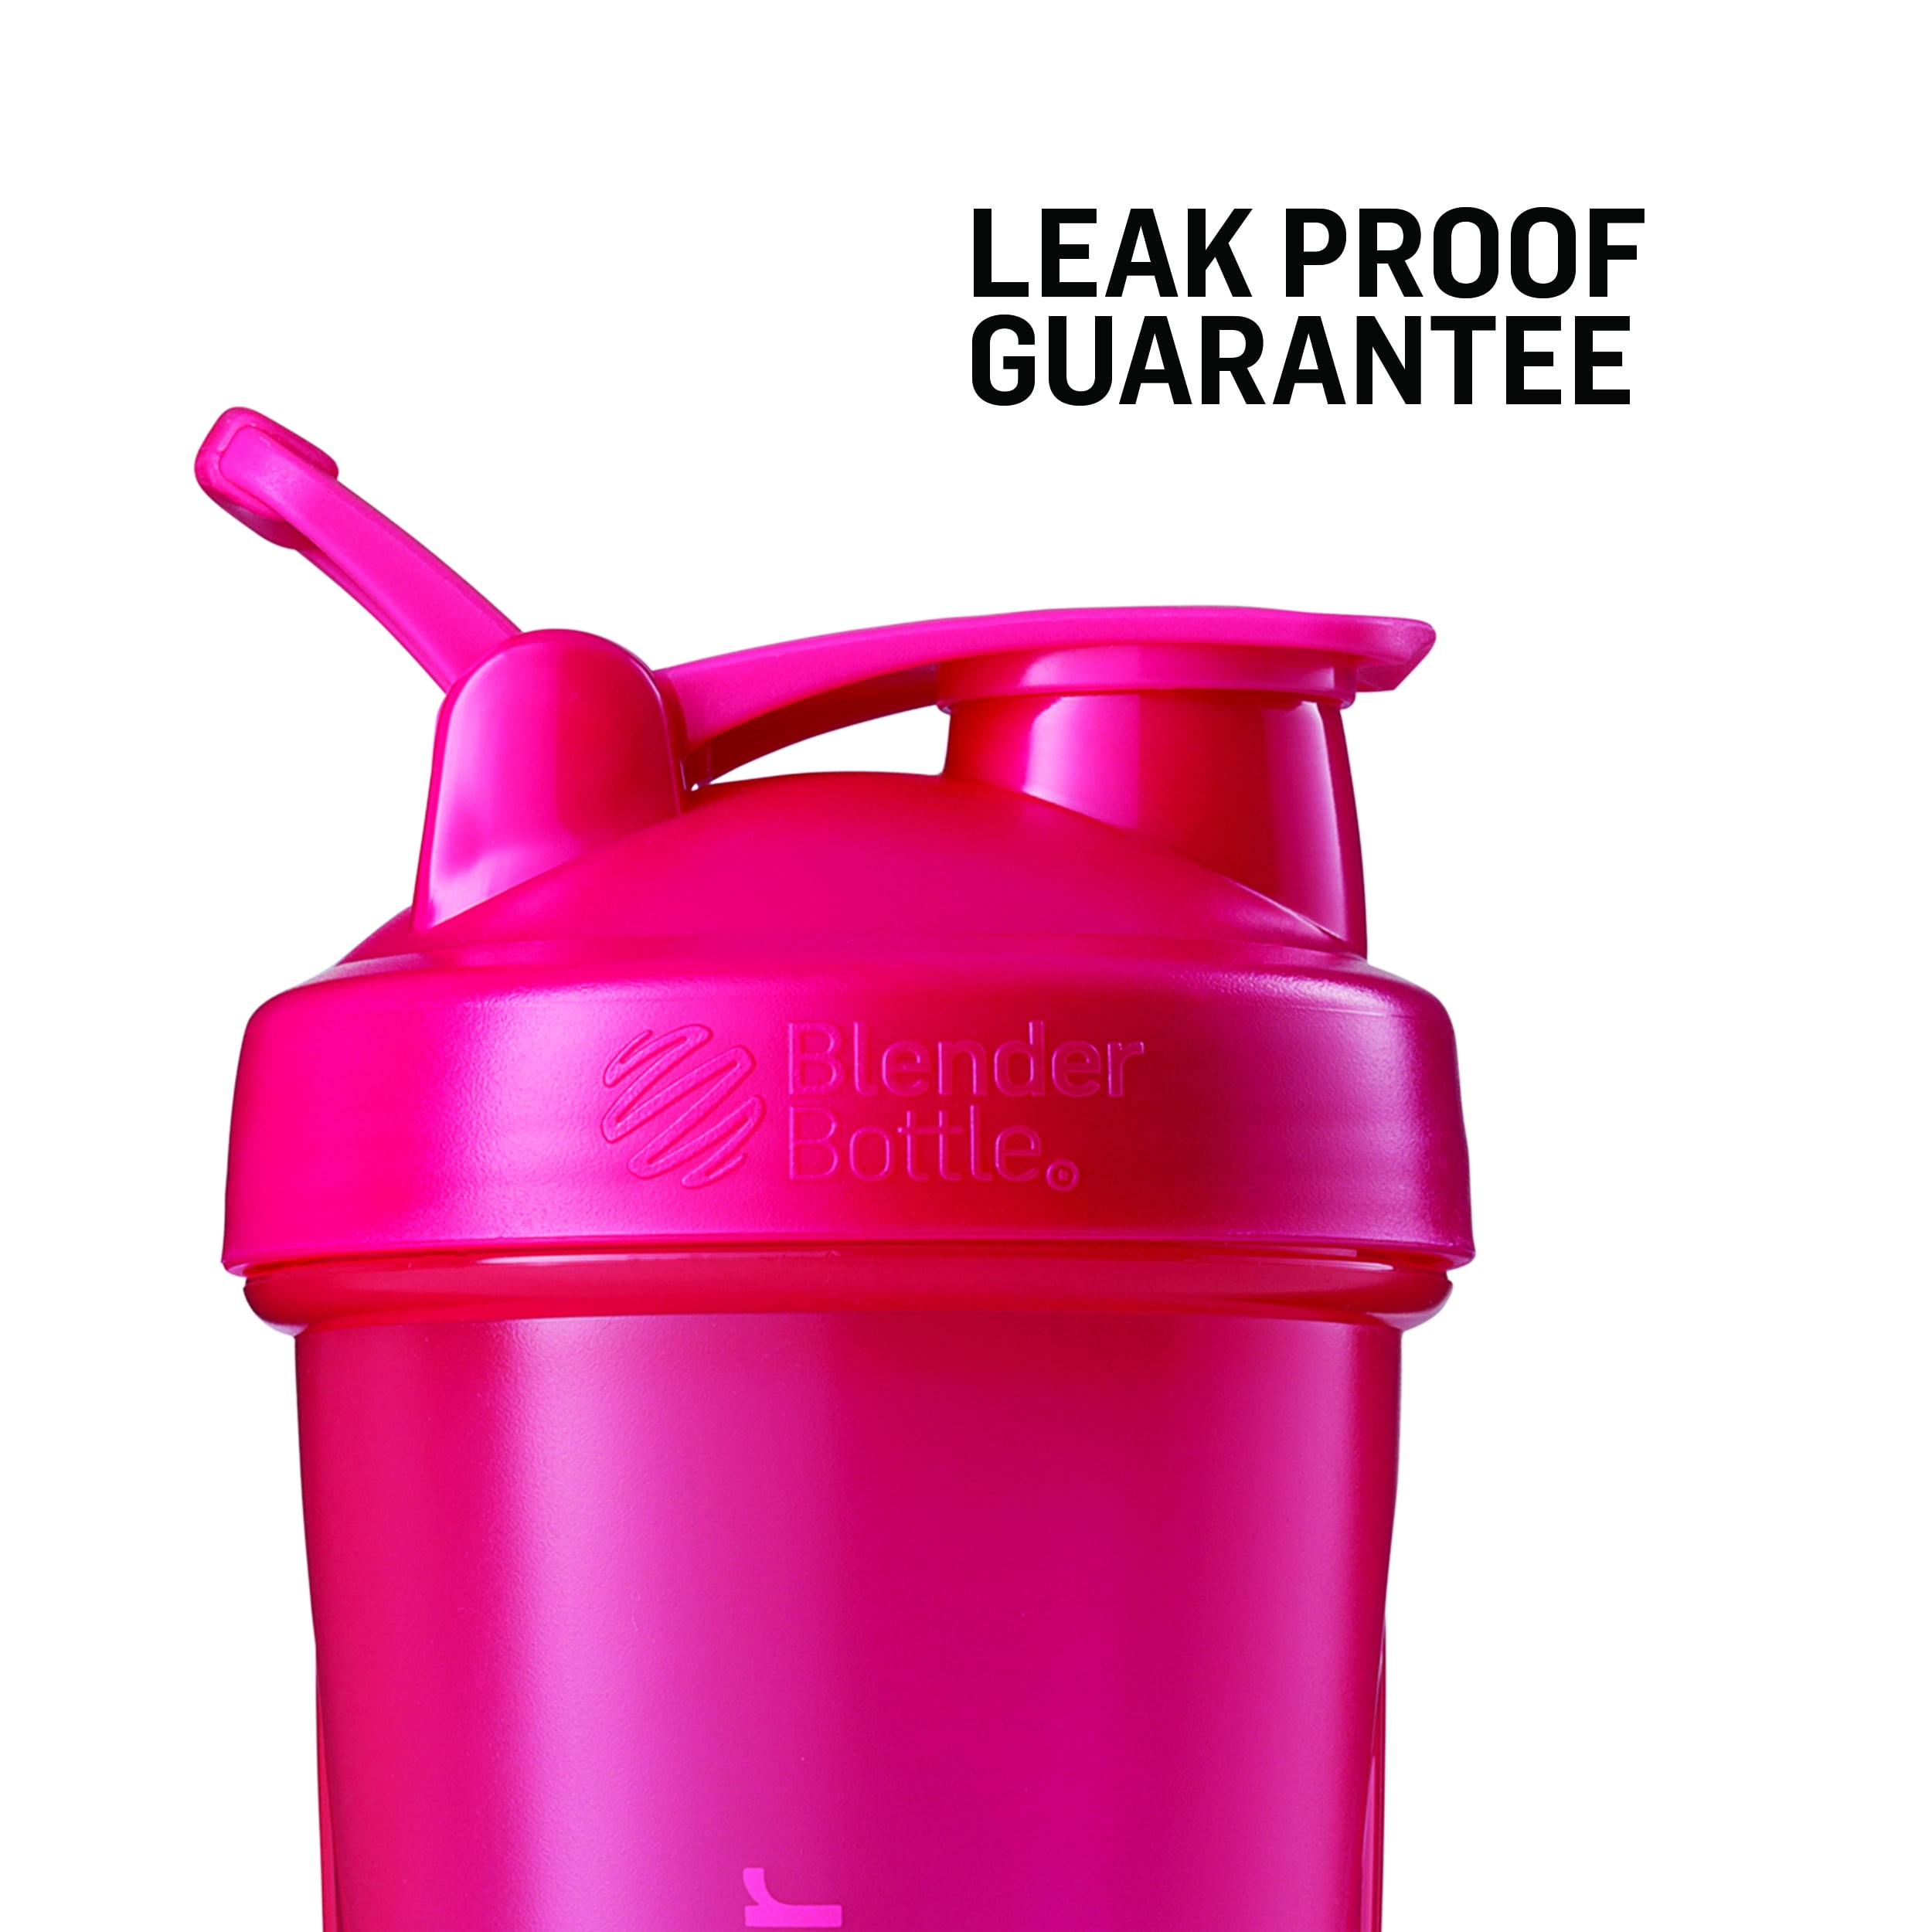 EBAT Shaker Bottle in Rose Red (Lid & Cup) w. Classic Loop Hook & Leak  Proof,Scale of 12 OZ/400 ML,A Small Stainless Whisk Blender,BPA  Free,Certified PP5,Dishwasher Safe (Other Color-Style Available). - Yahoo